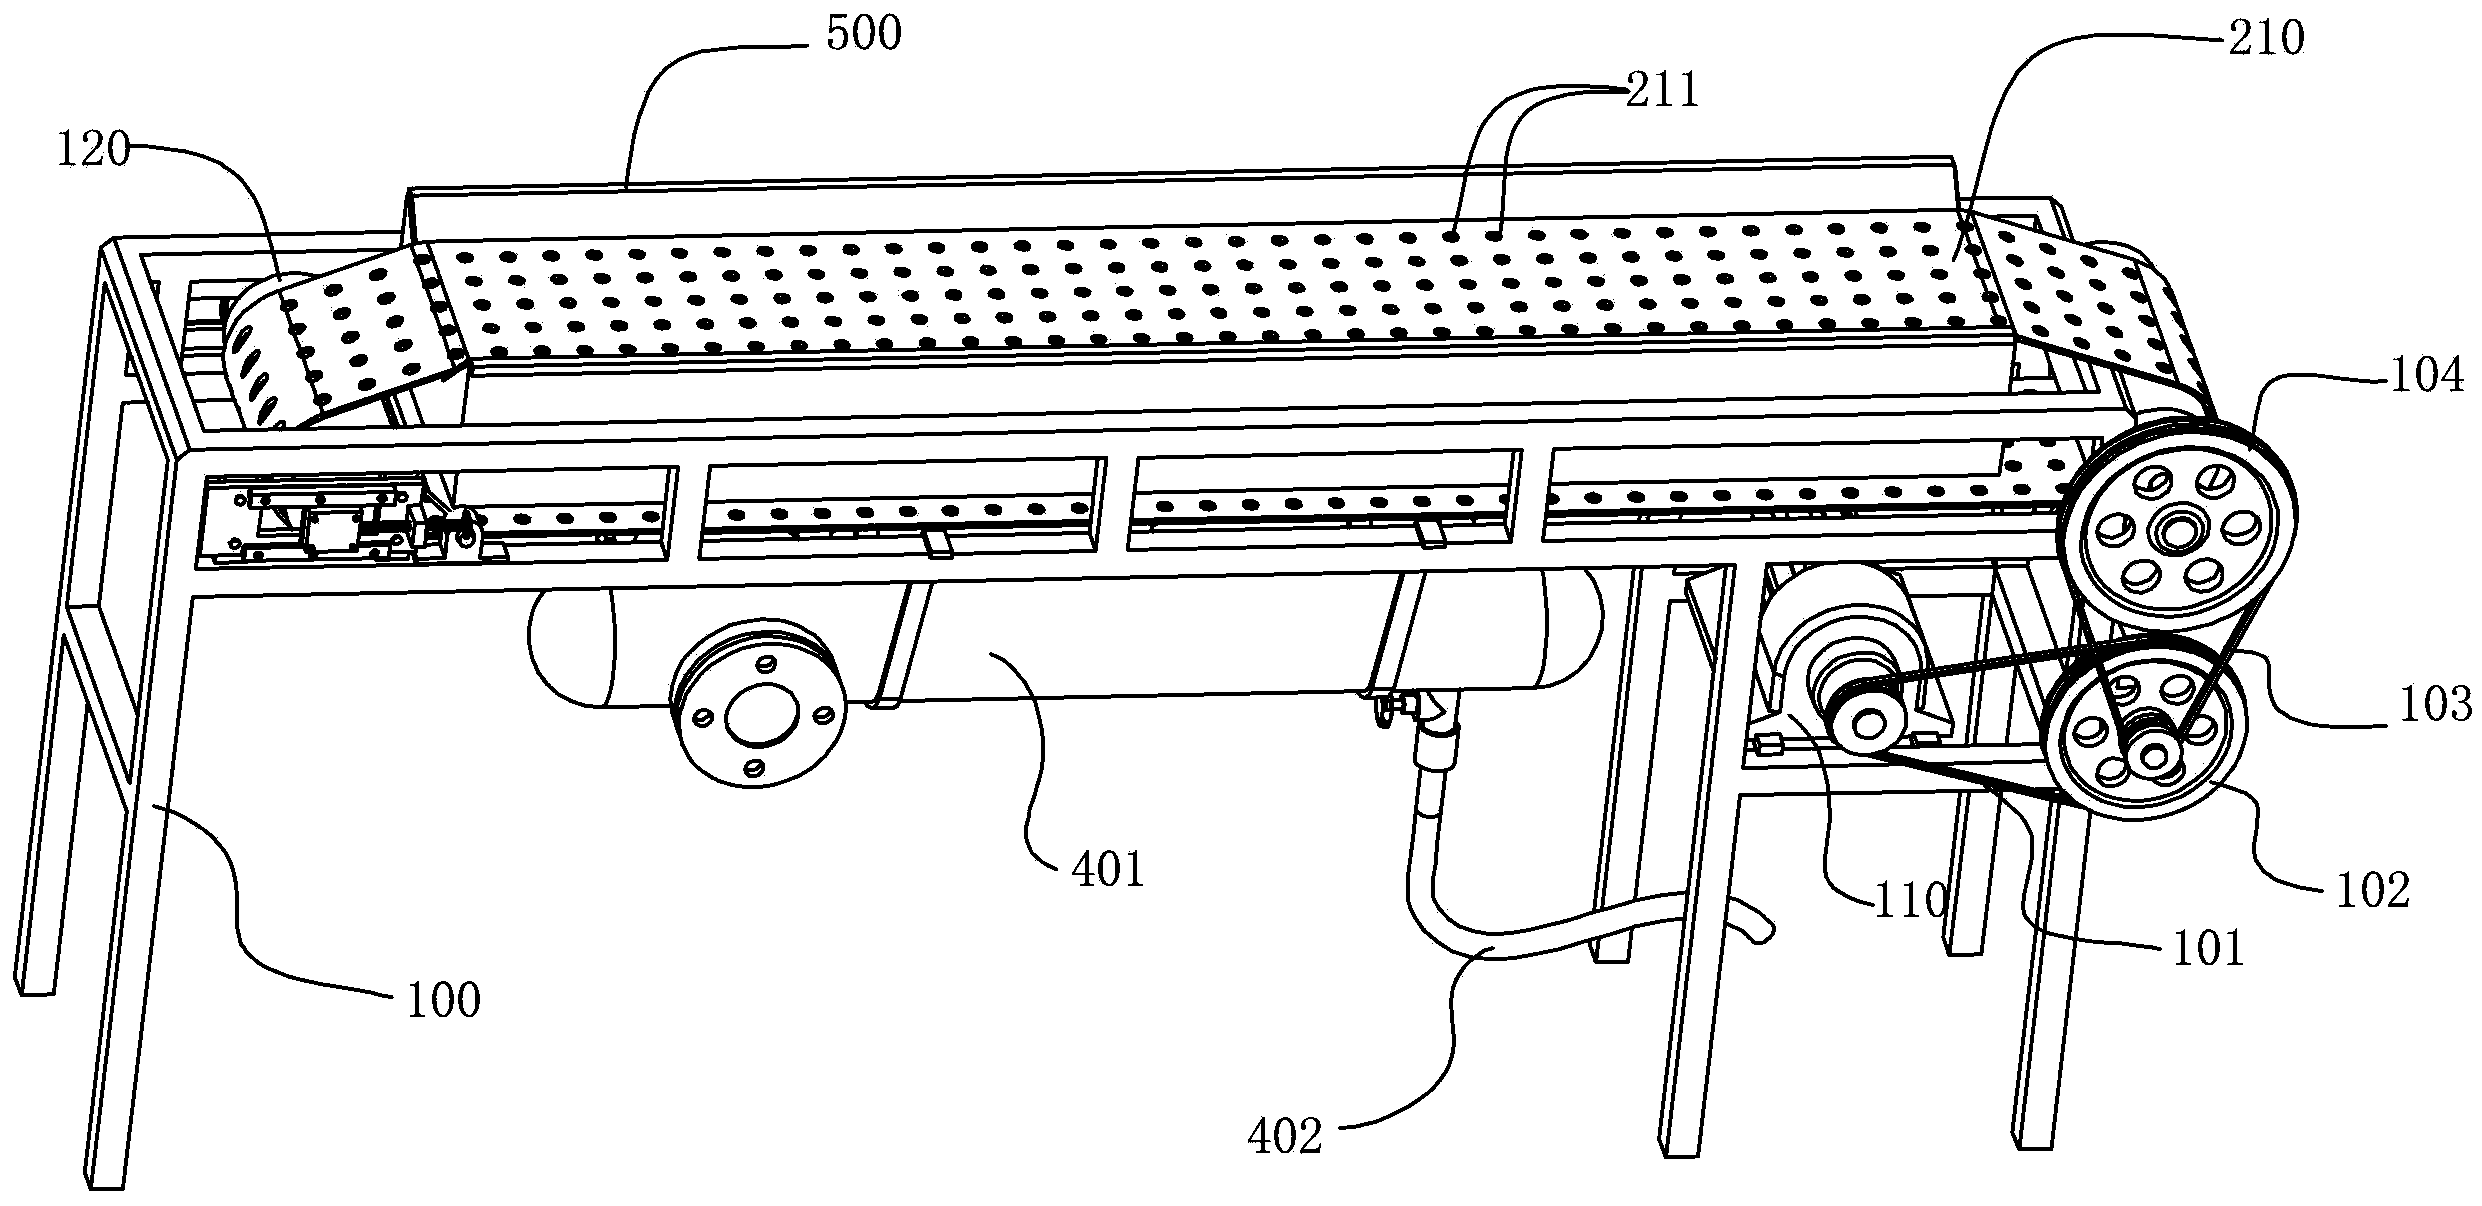 Automatic flour steaming device